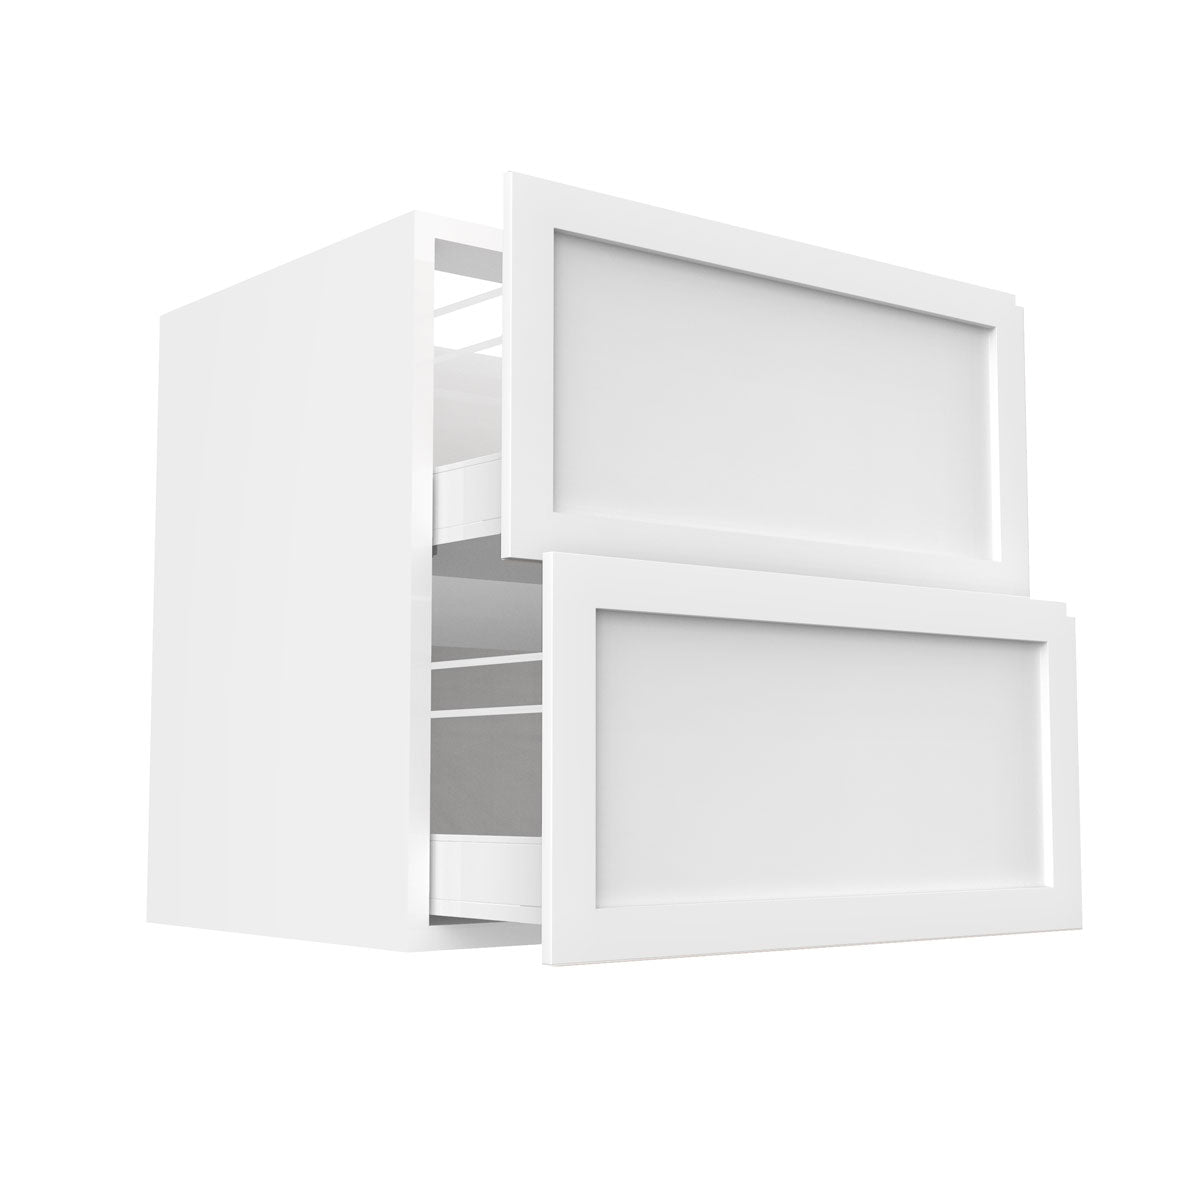 RTA - White Shaker - Two Drawer Base Cabinets | 30"W x 30"H x 23.8"D